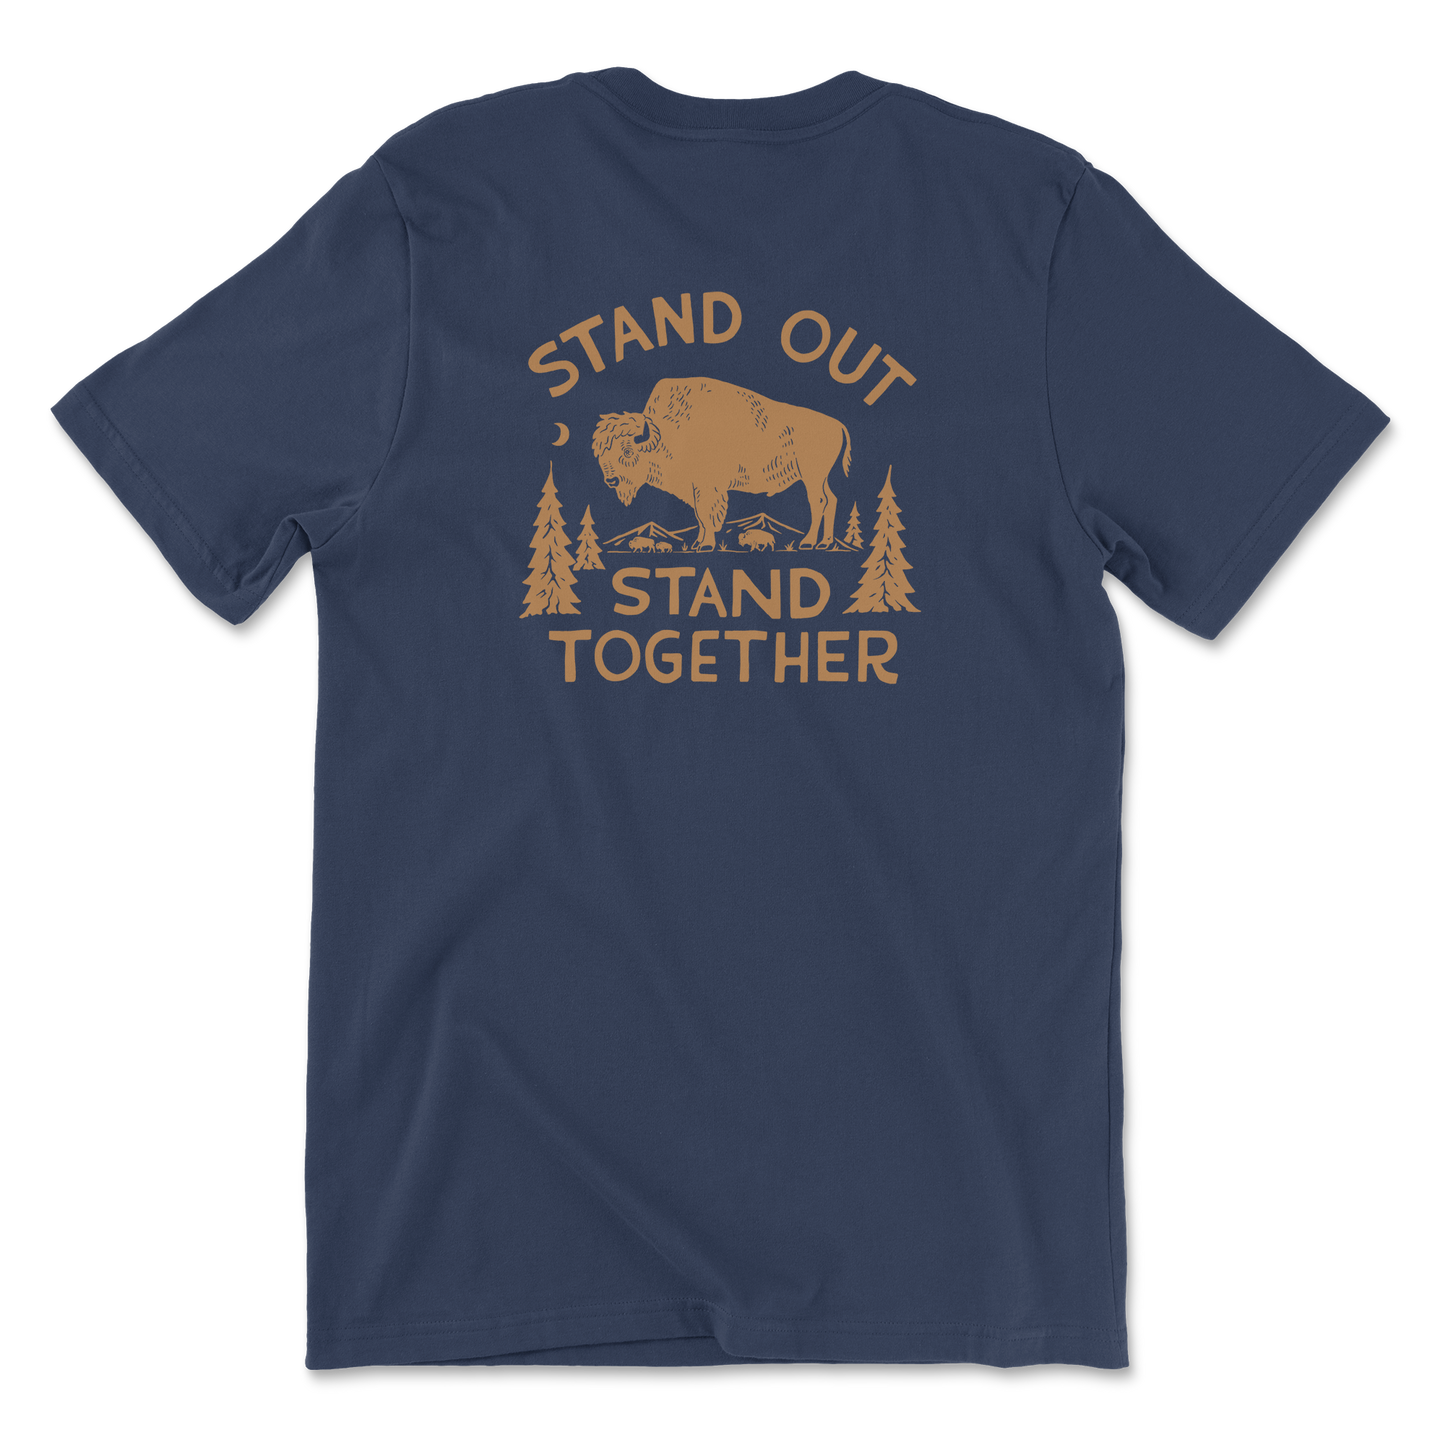 "Stand Out & Stand Together" Navy Tee